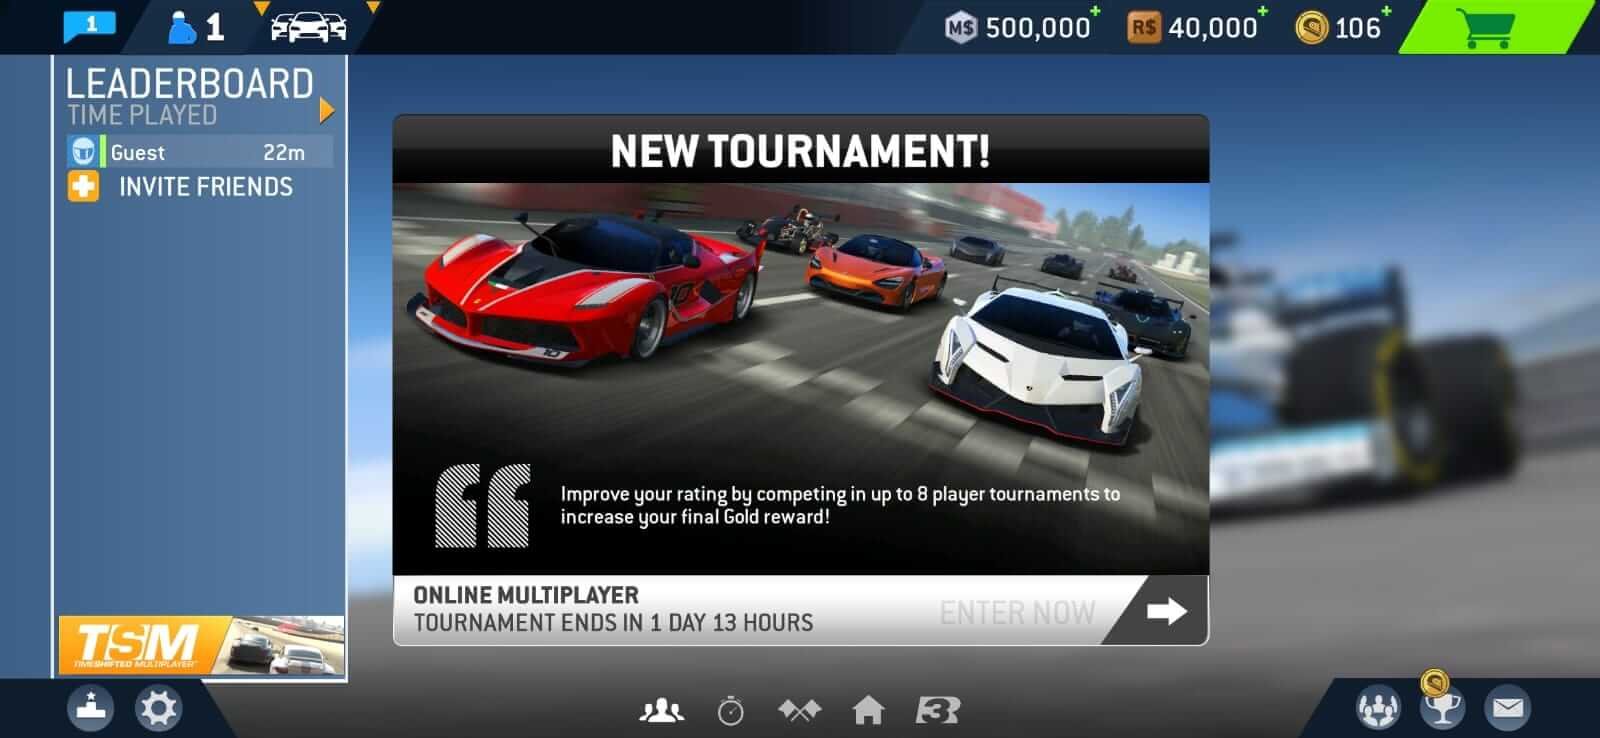 Real Racing 3 Mod apk [Unlimited money] download - Real Racing 3